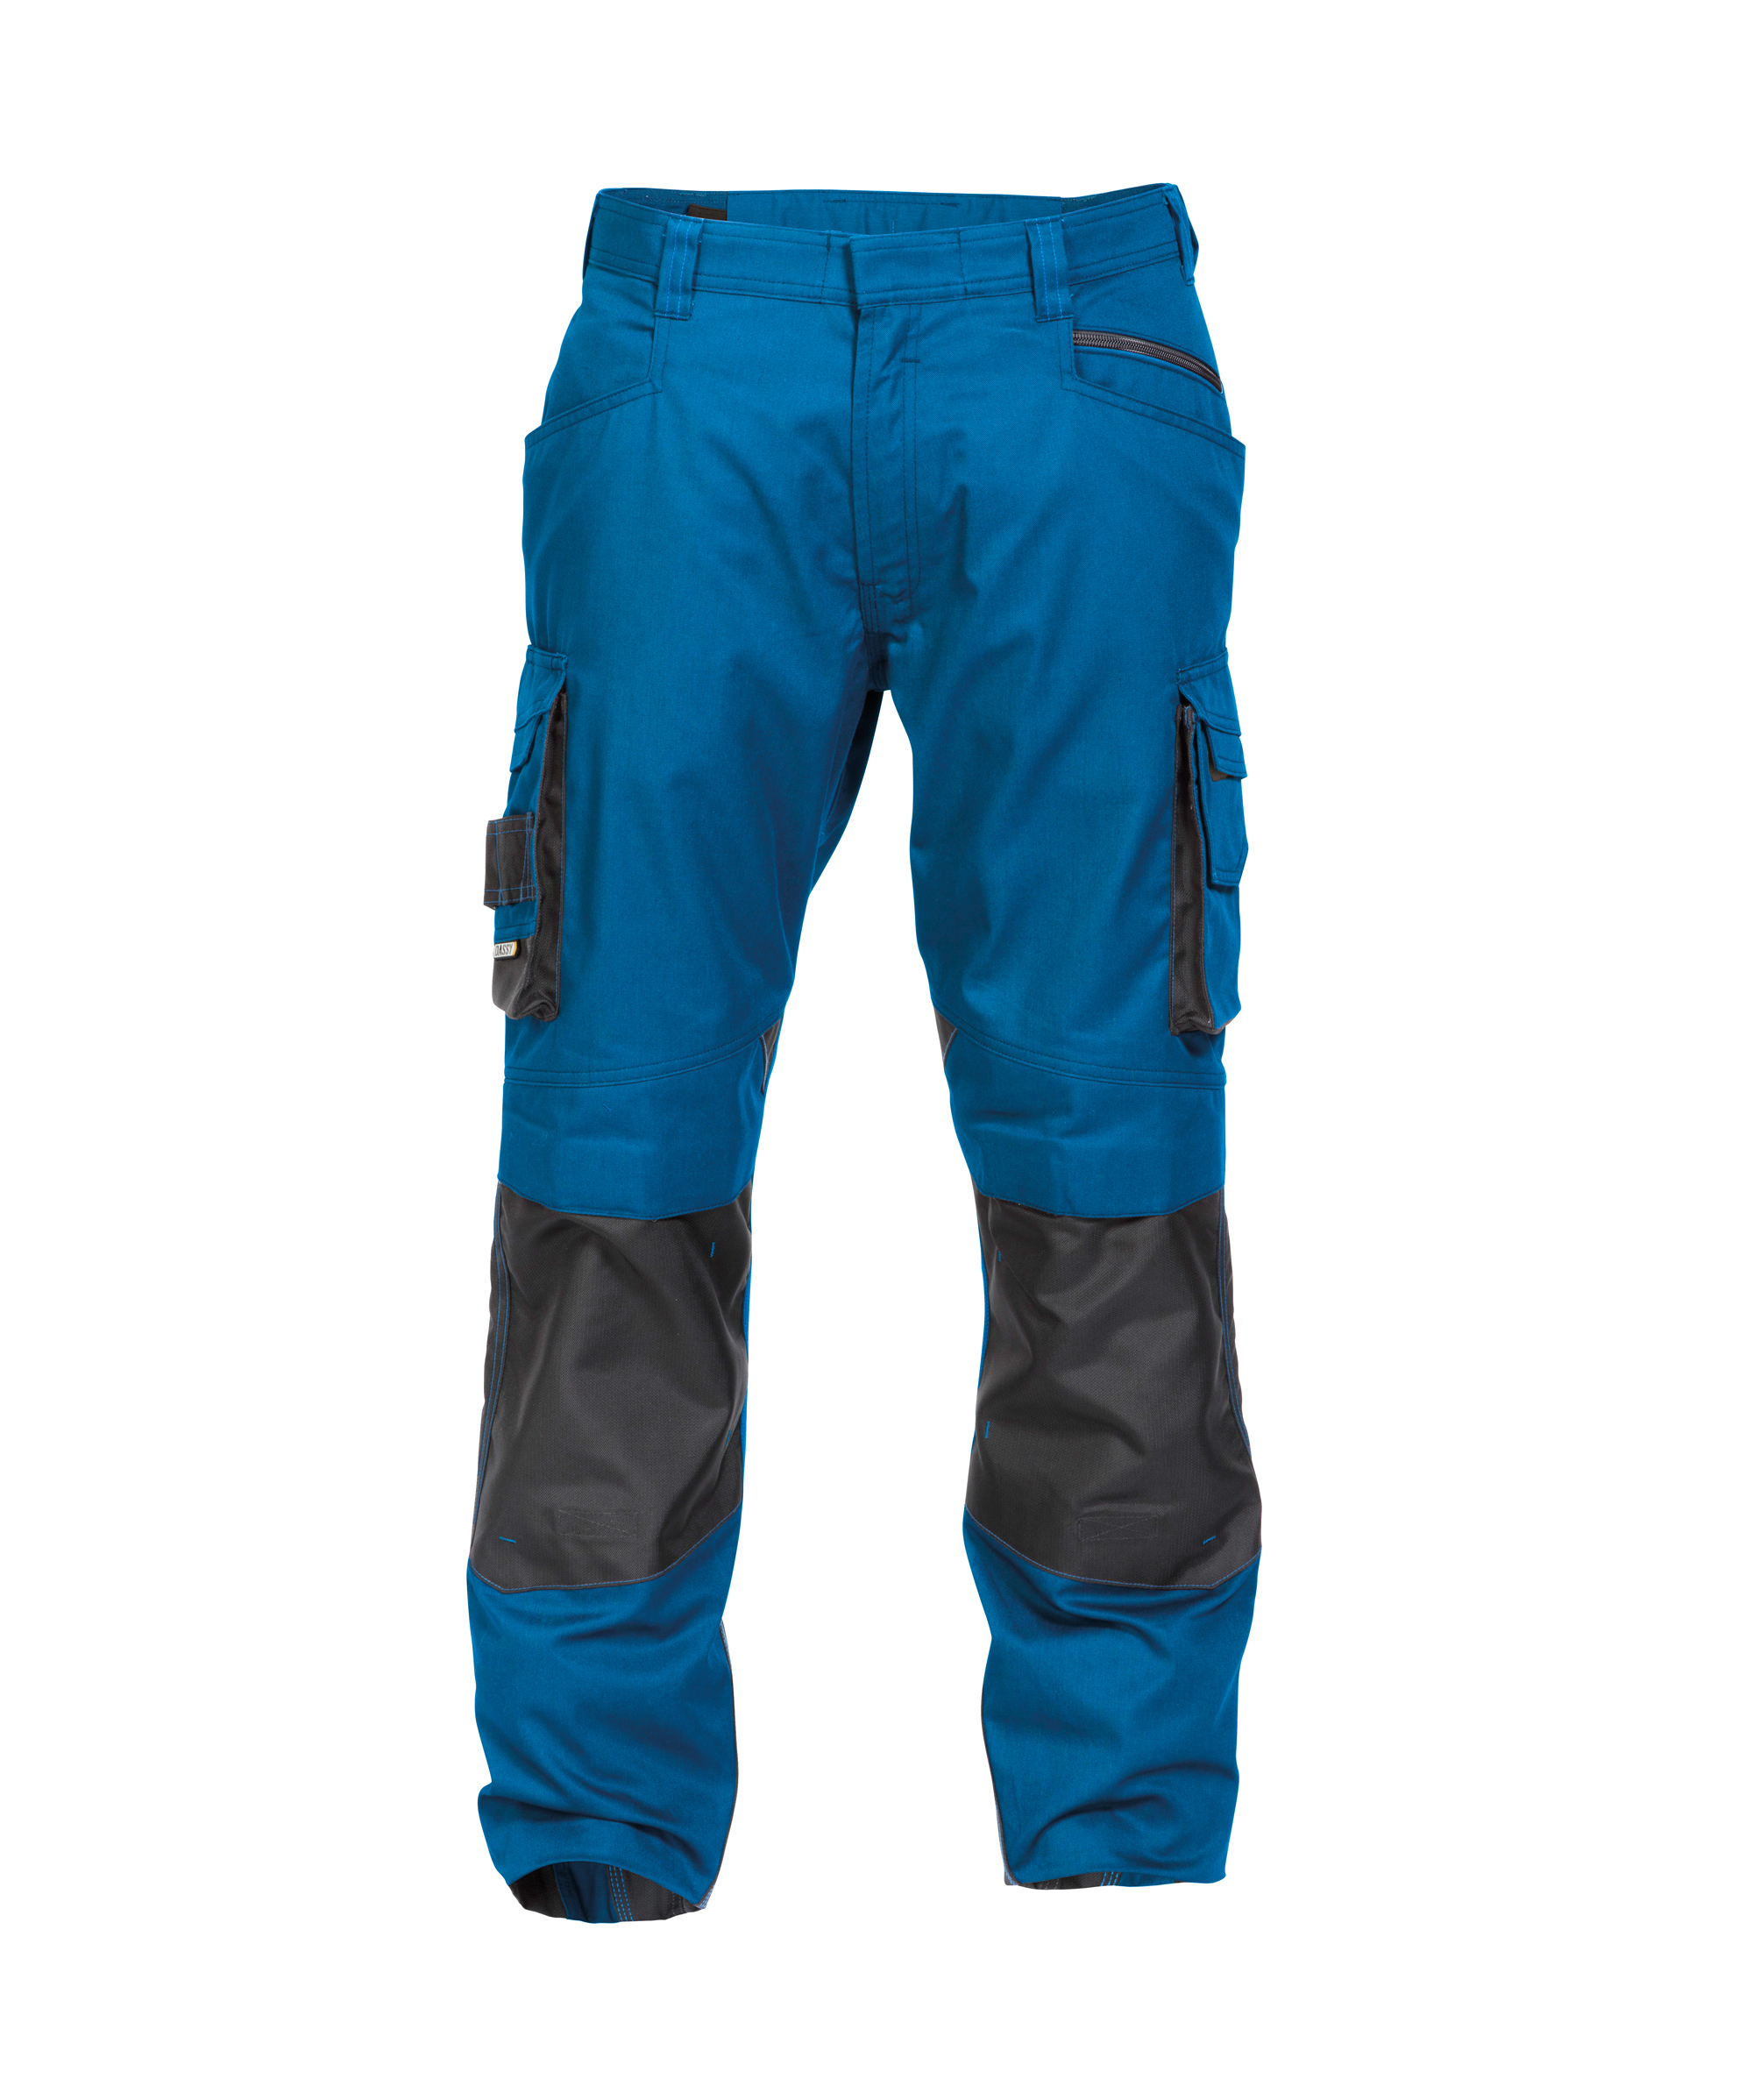 nova_two-tone-work-trousers-with-knee-pockets_azure-blue-anthracite-grey_front.jpg